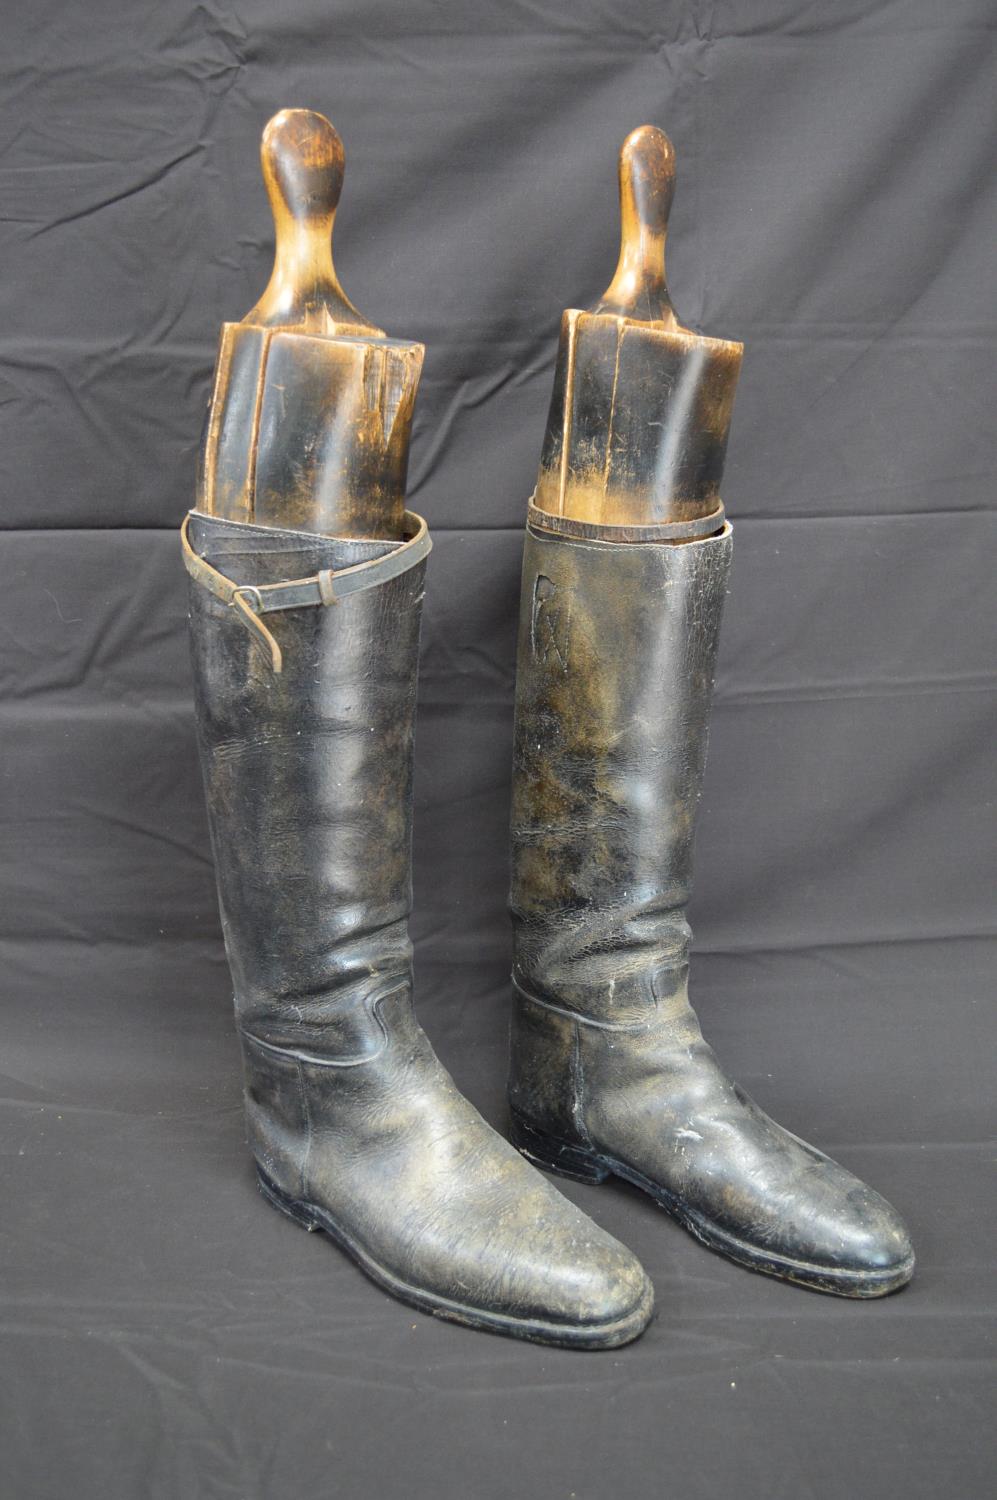 Pair of black leather riding boots with wooden trees Please note descriptions are not condition